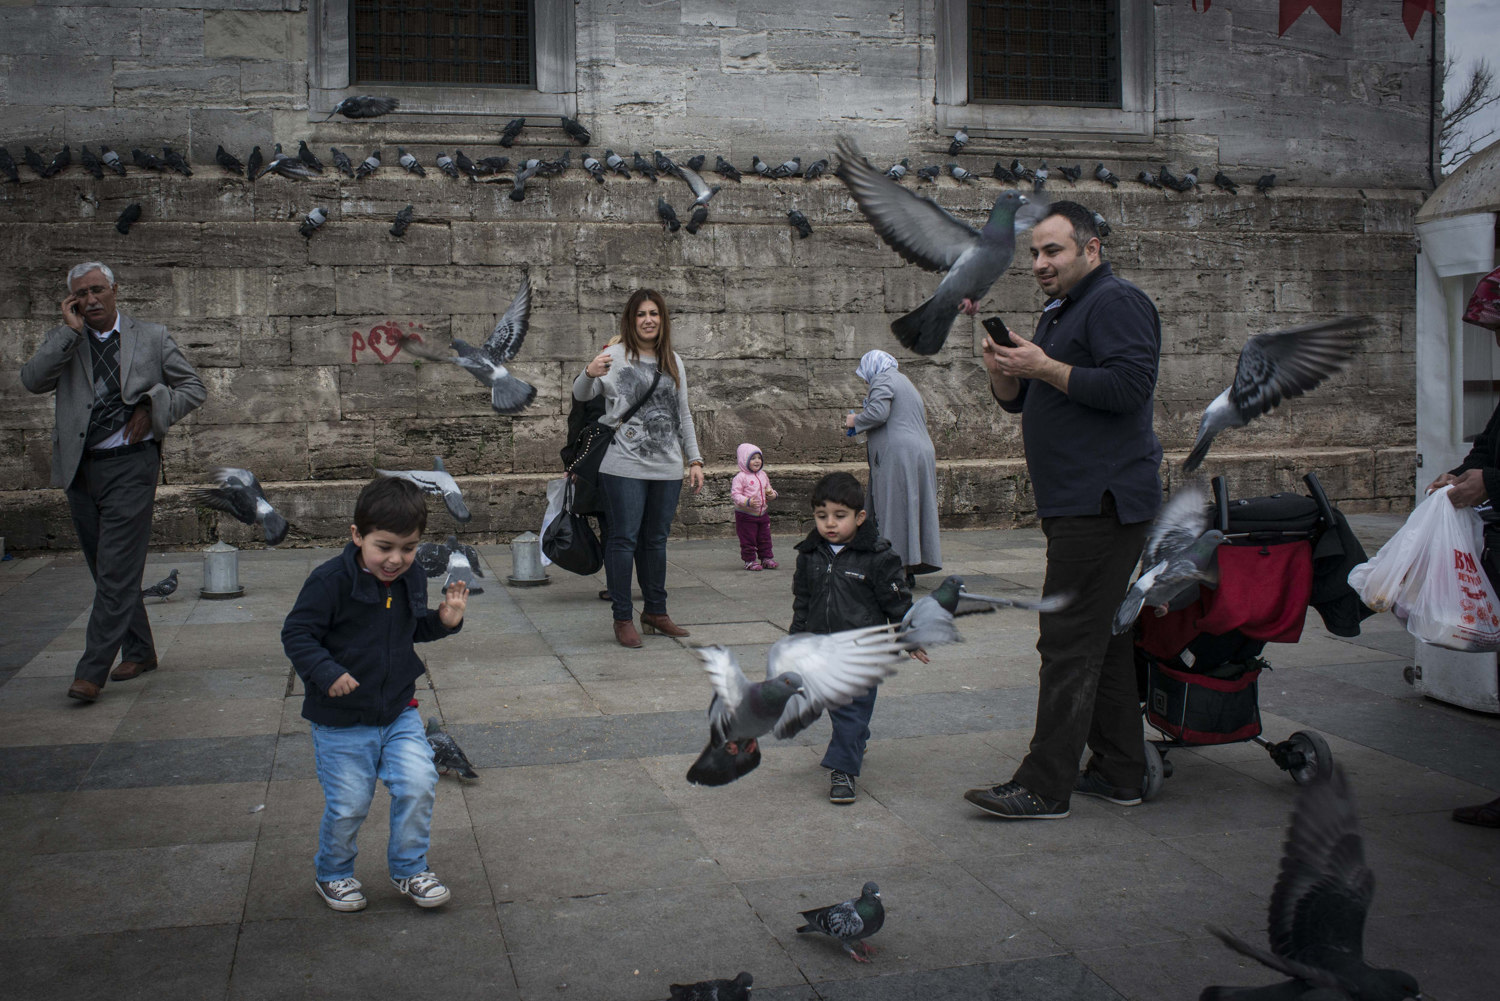  A boy feeds birds while his family watches outside of 'Yeni Cami' or New Mosque in the Eminönu section of Istanbul. Interestingly the Yeni Cami is one of the oldest mosques in Istanbul, but was considered 'new' when construction started in 1597. 